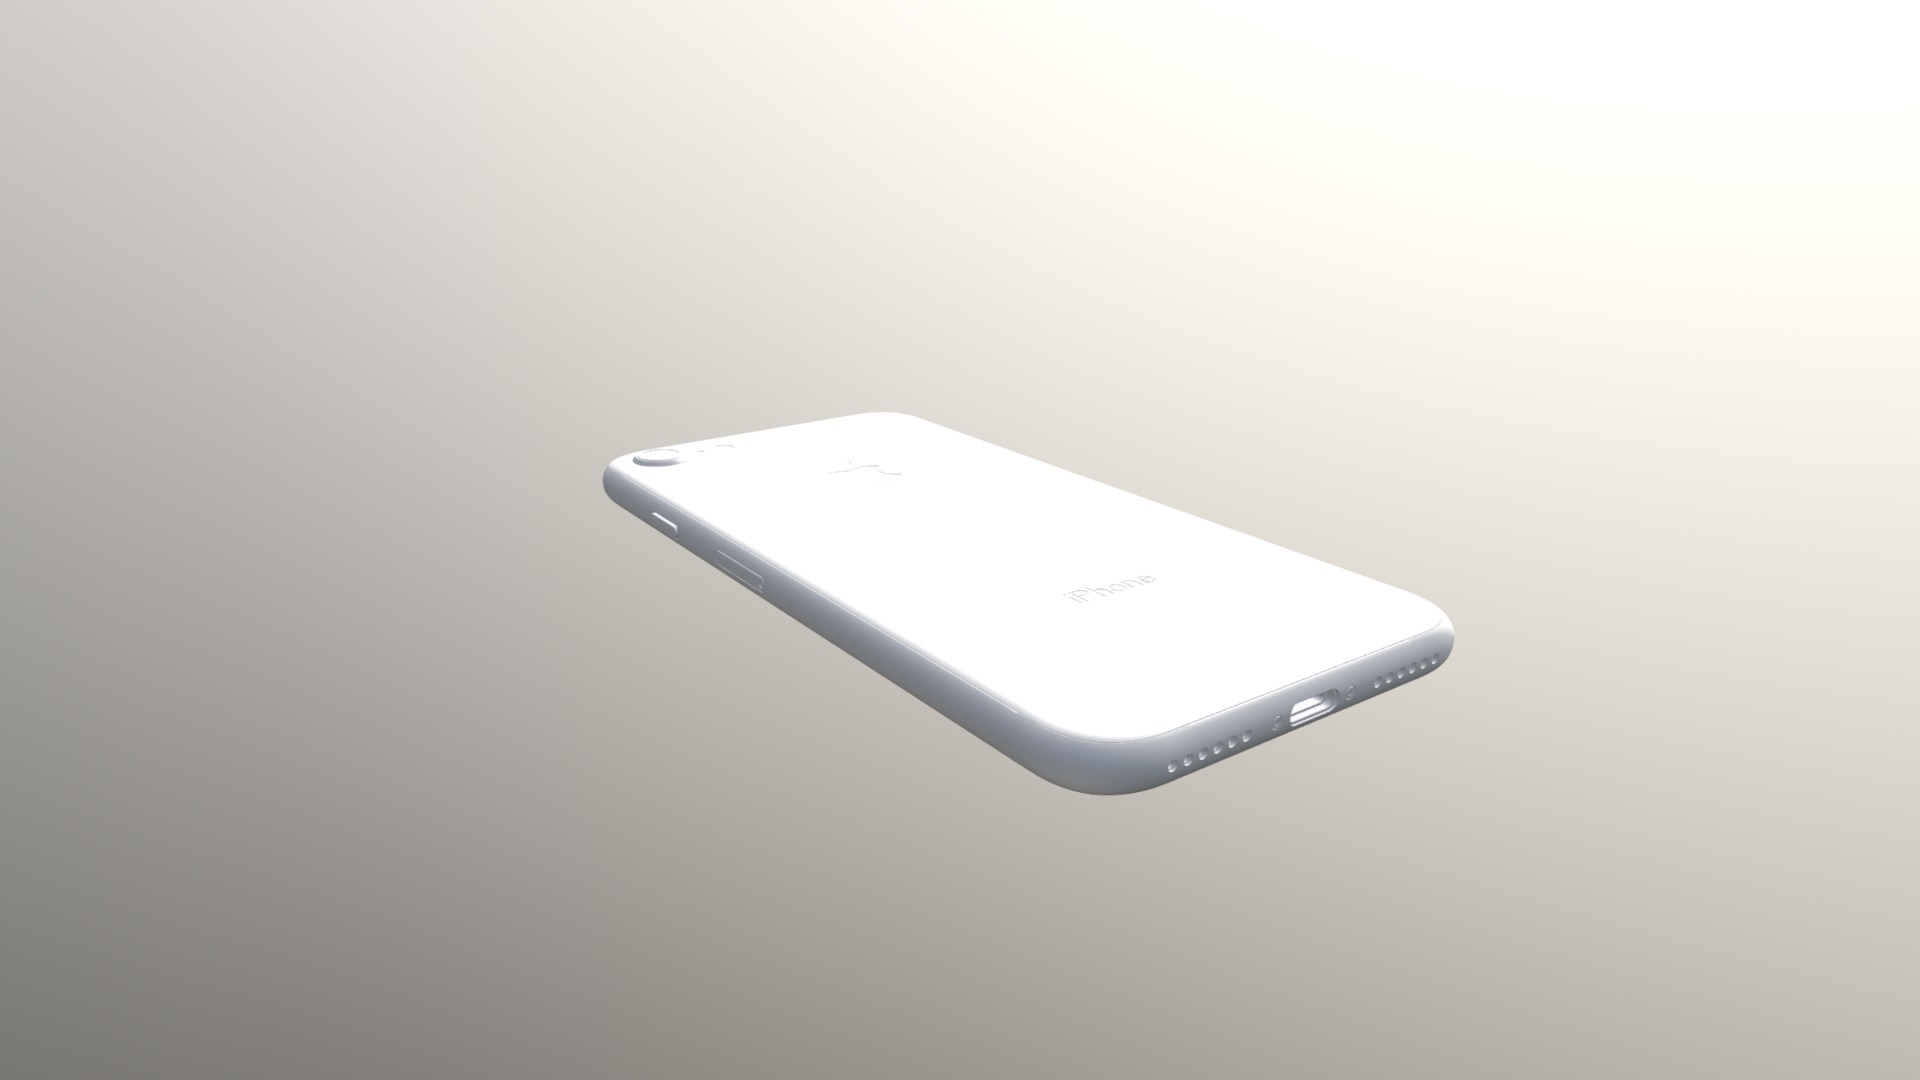 3D model iPhone 8 – original Apple dimensions - This is a 3D model of the iPhone 8 - original Apple dimensions. The 3D model is about a white cell phone.